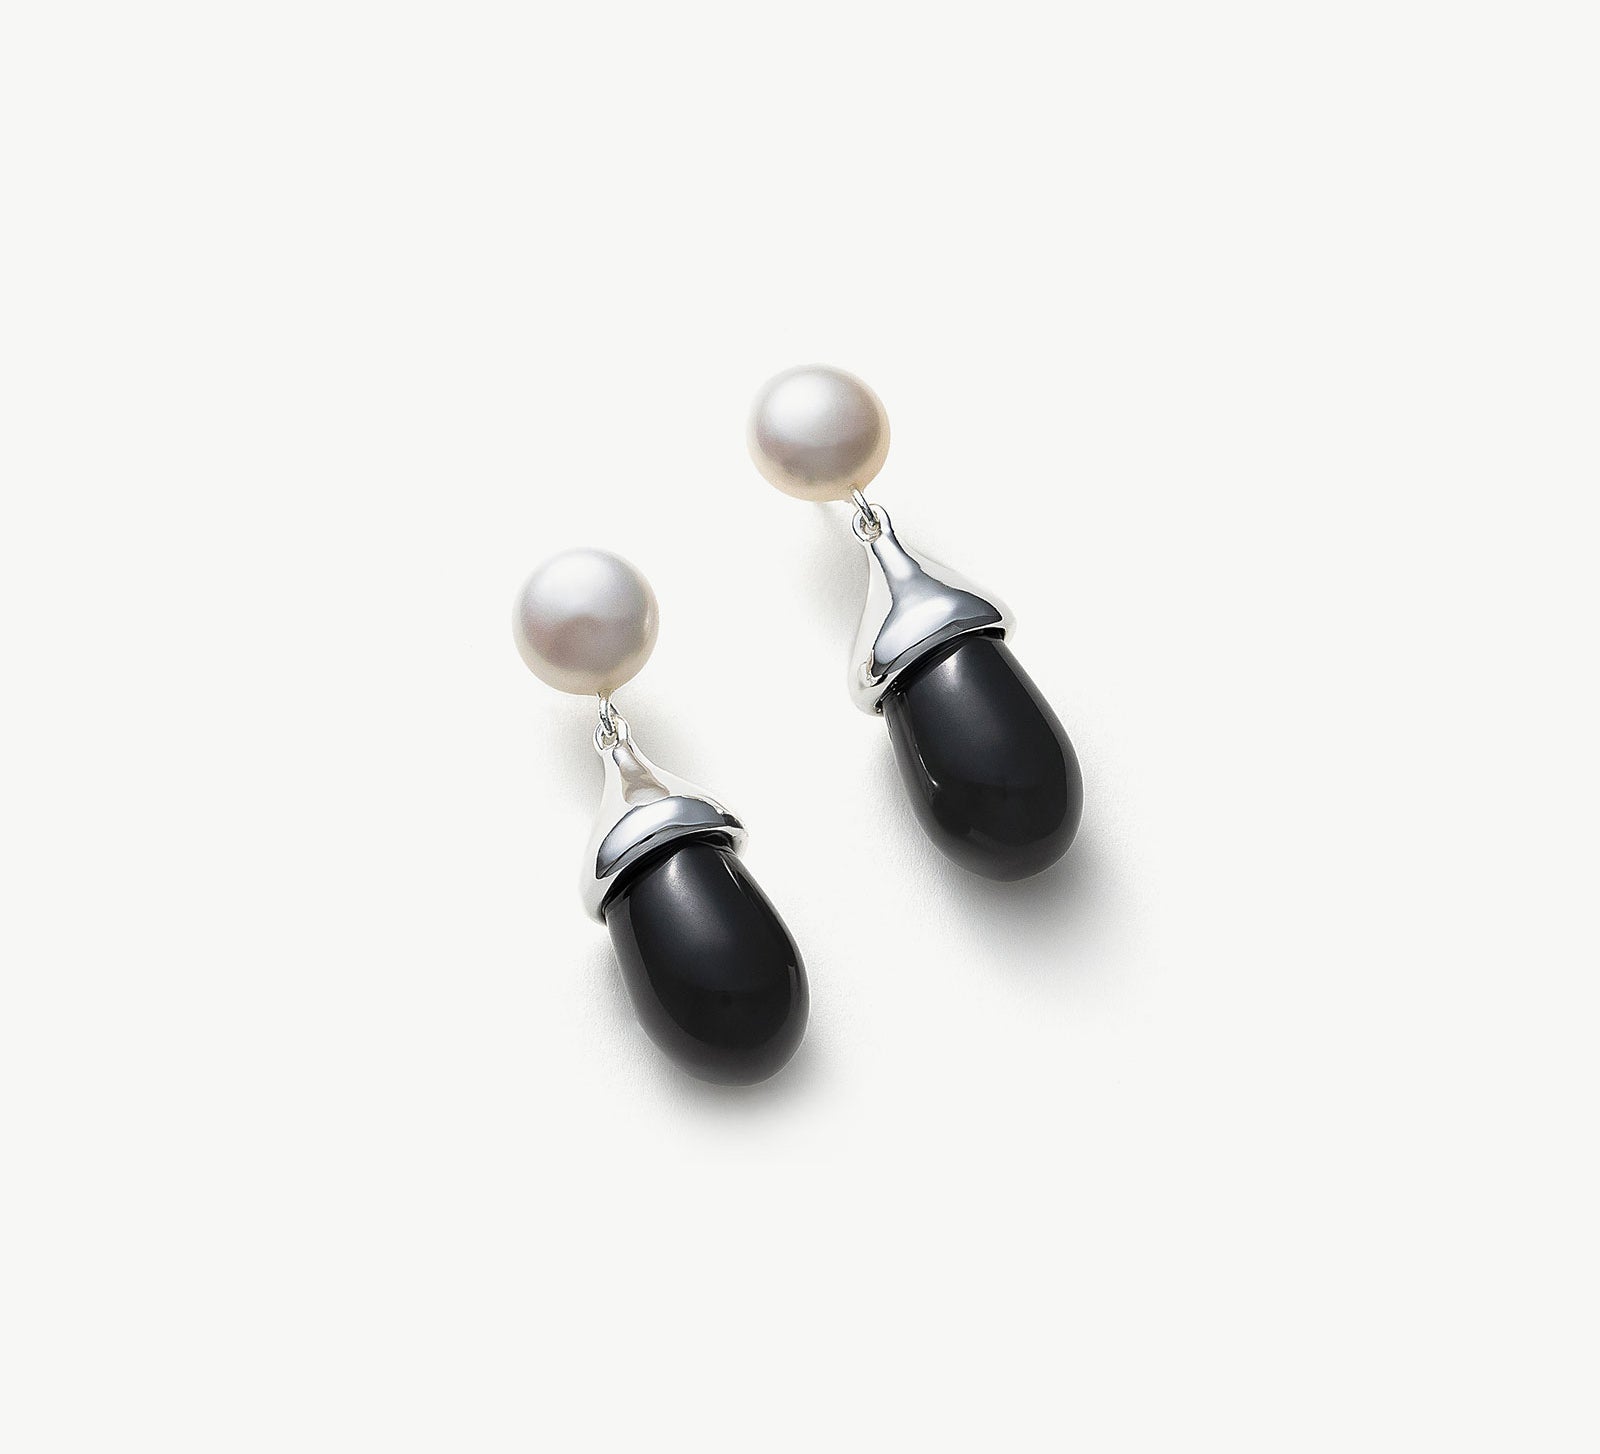 Elegant Silver Drop Earrings with Black Agate and Pearl Accents"